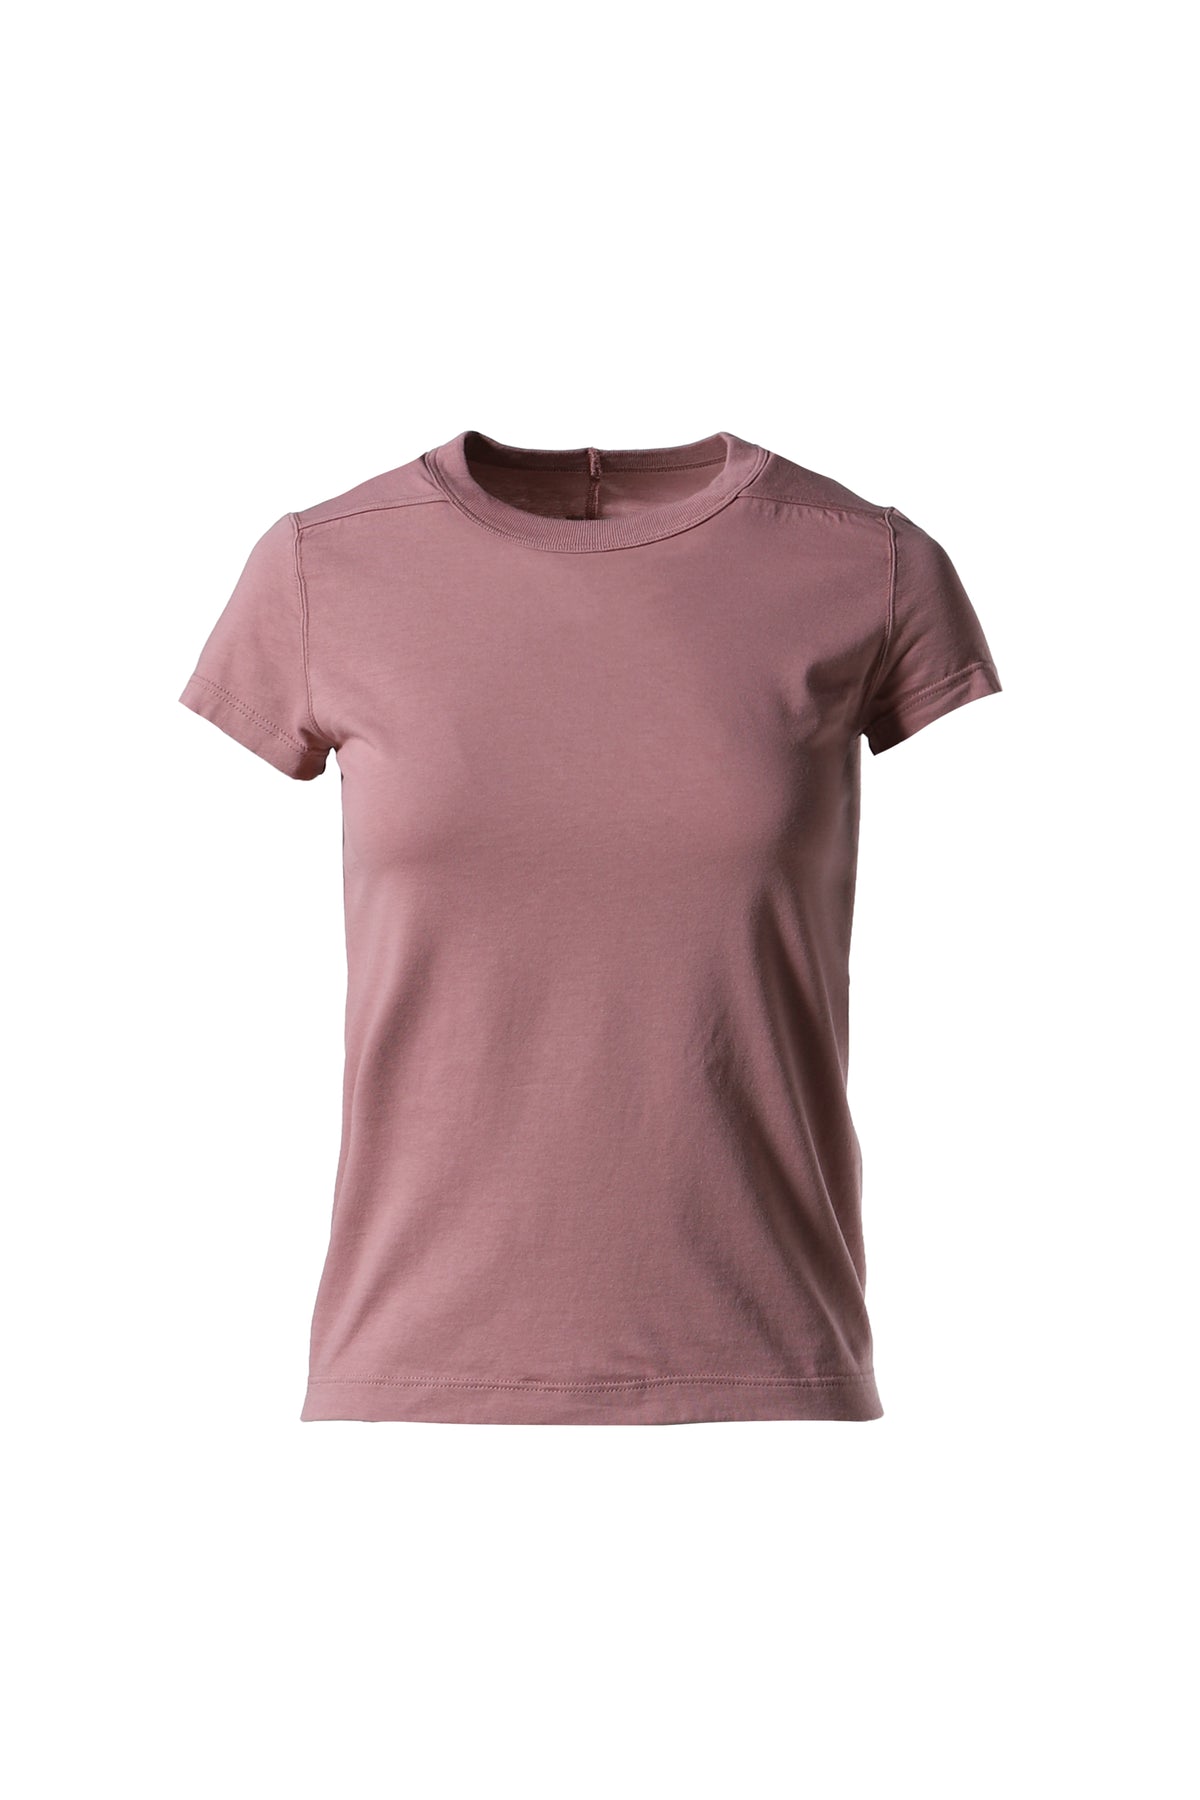 CROPPED LEVEL T / DUSTY PINK